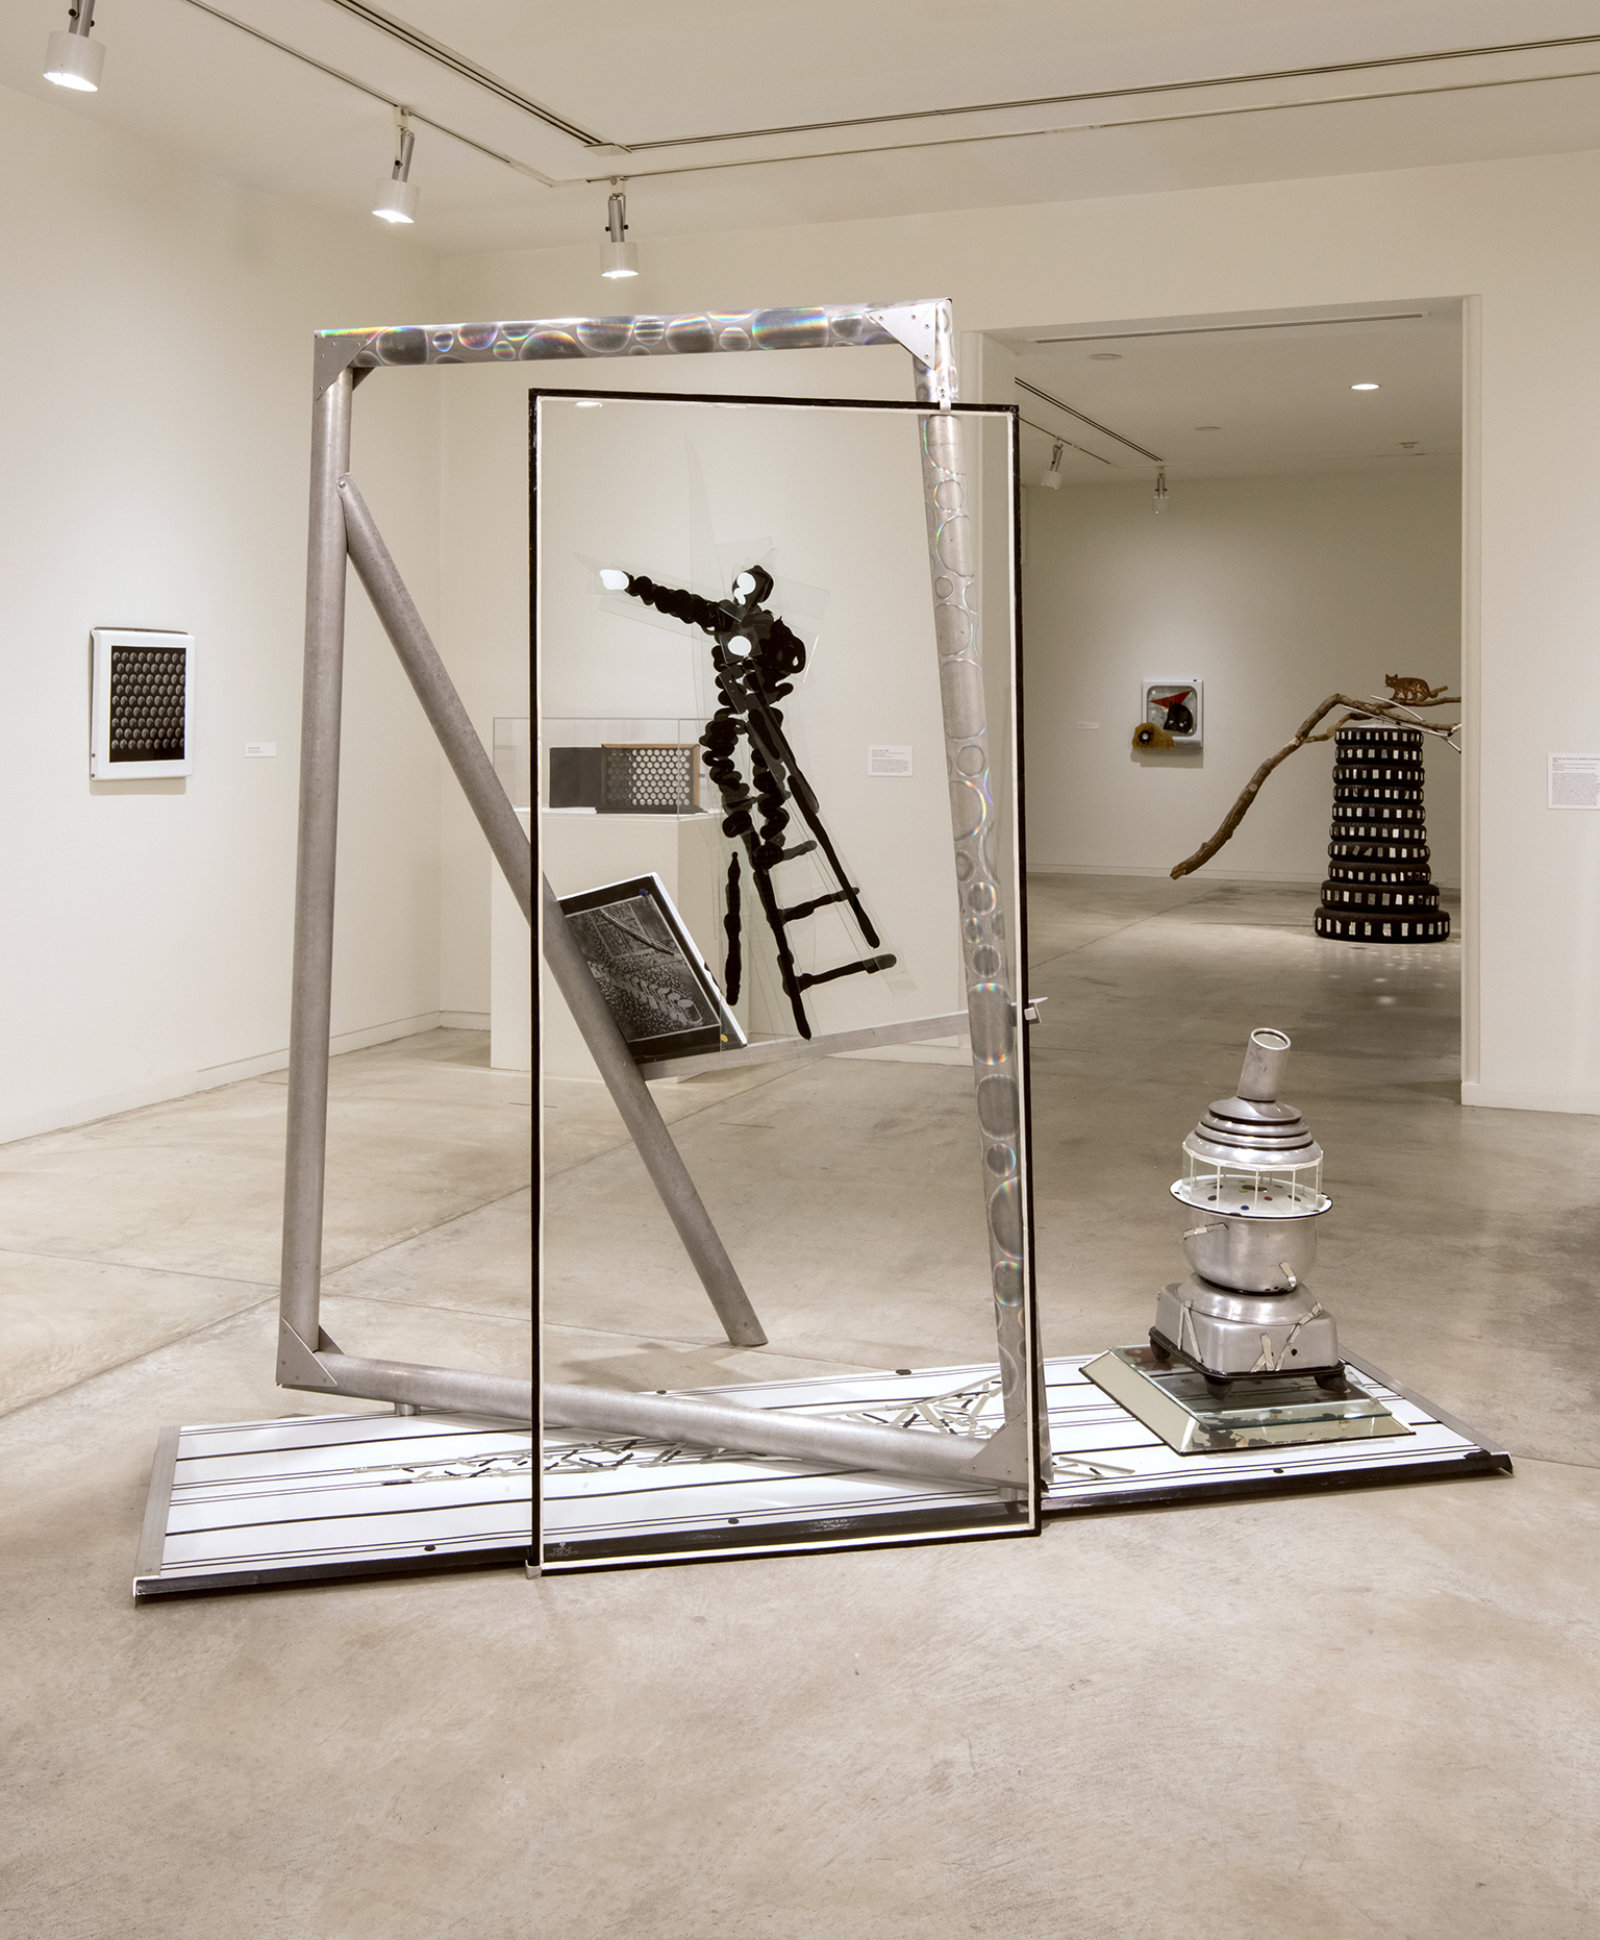 Jerry Pethick, One Side of Seurat, 1983, enamelled steel, aluminum, mirror, glass, silicone seal, etched spectrafoil, enamelled copper, 95 x 118 x 33 in. (240 x 300 x 84 cm)